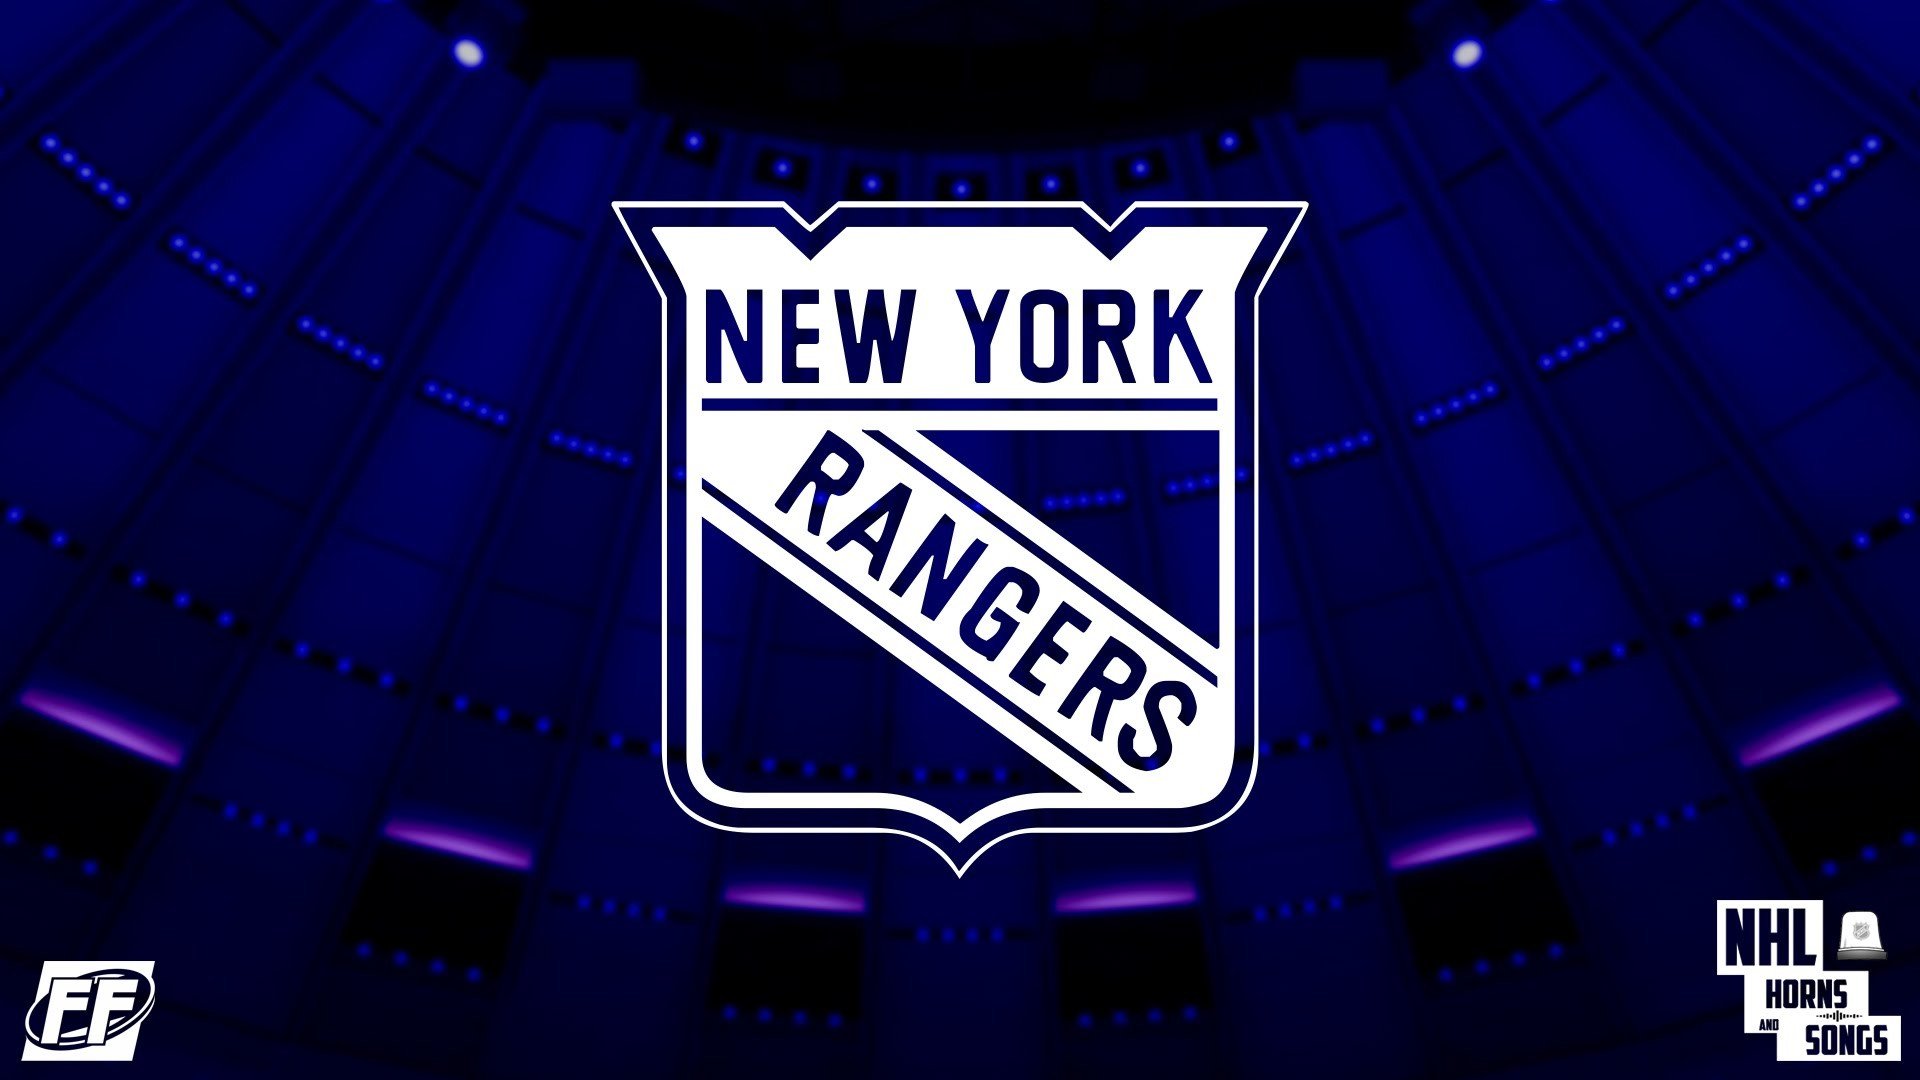 NY Rangers Wallpaper Images 74 images